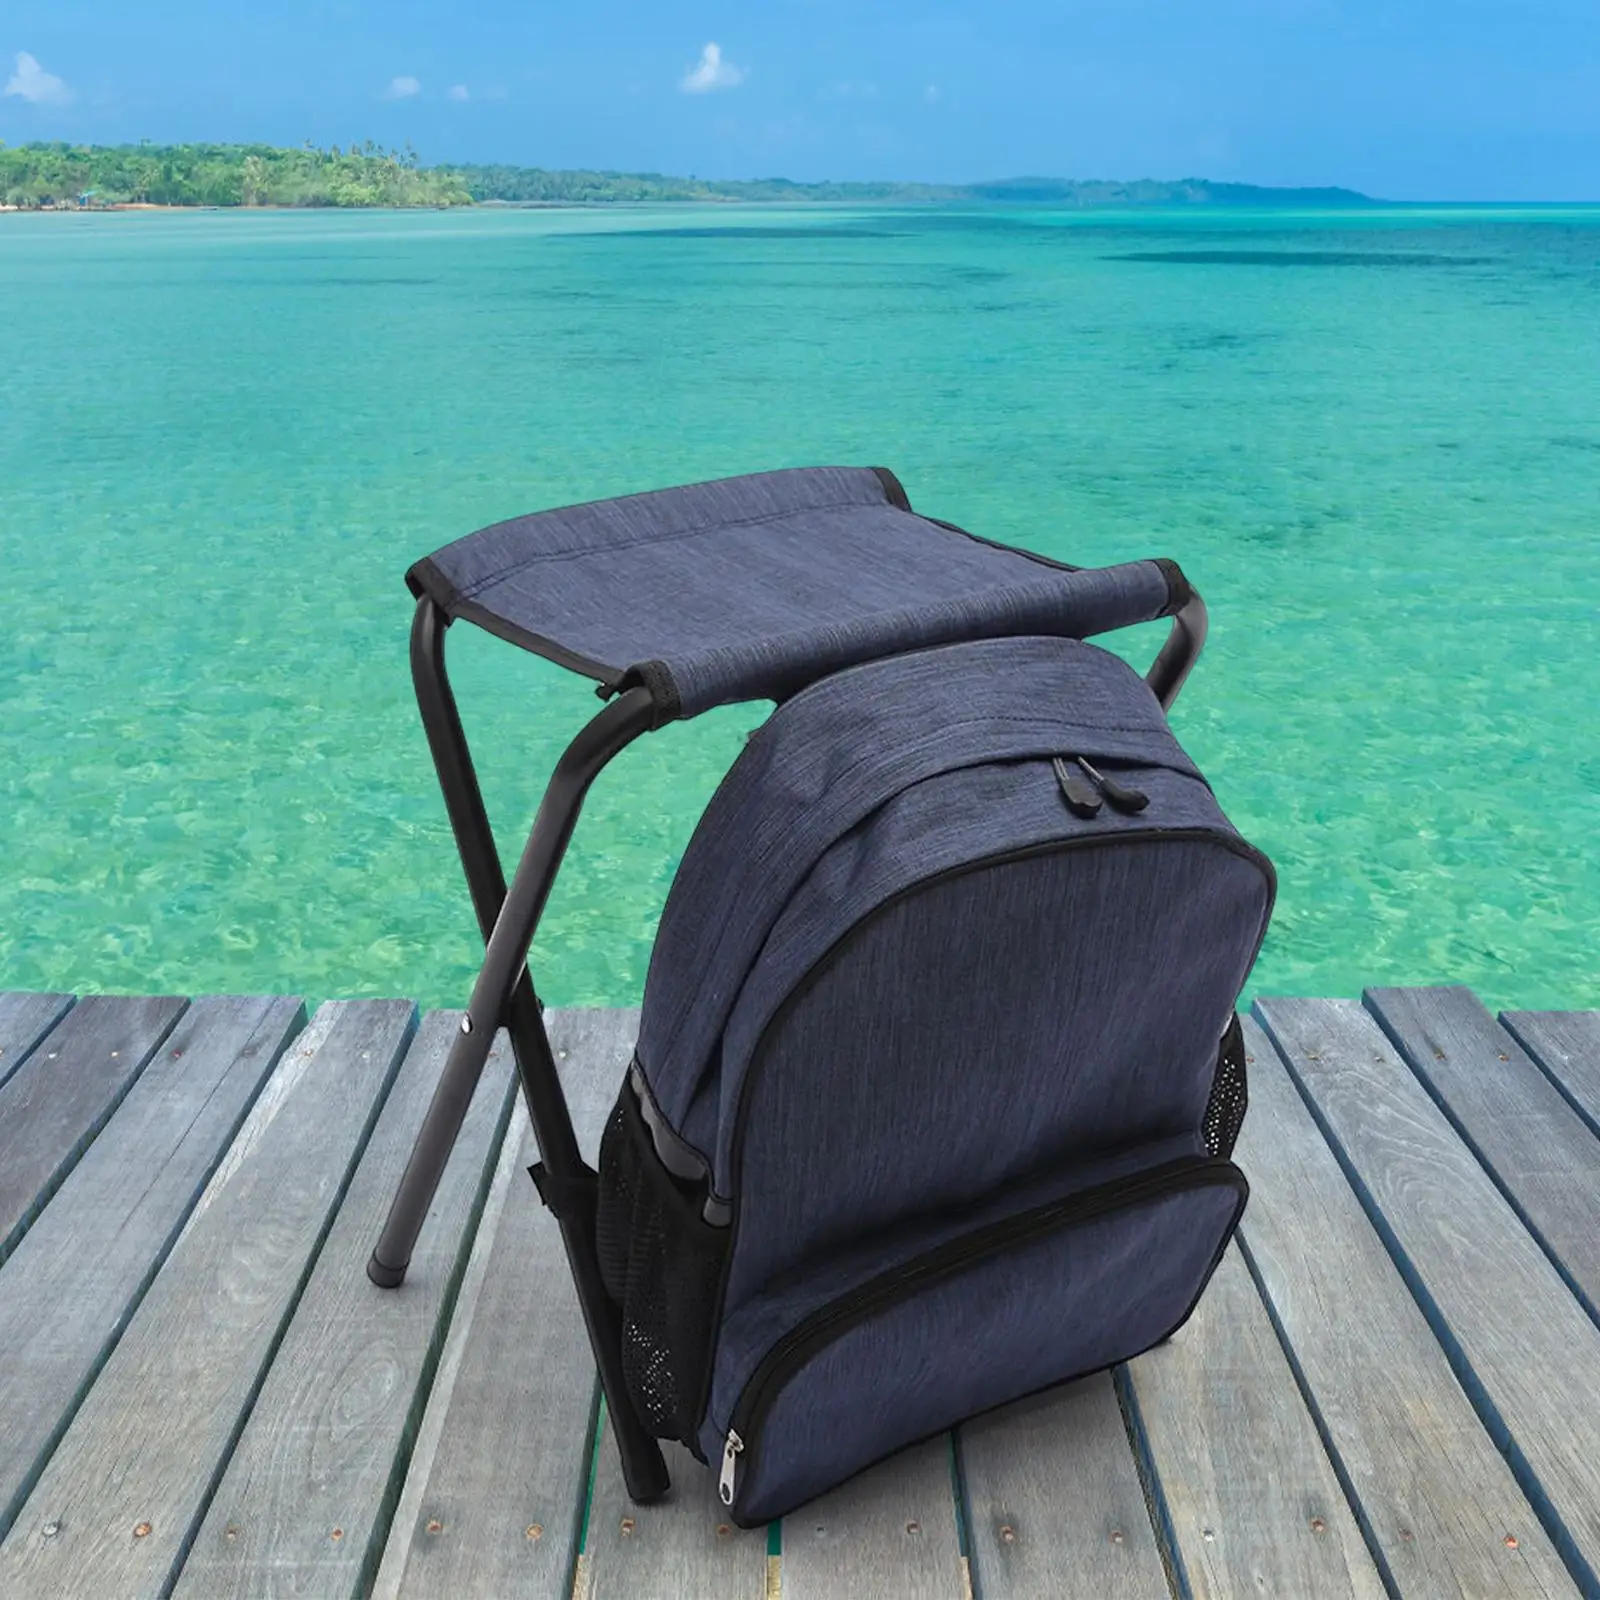 Fishing Seat Compact Chair Foldable Stool with Bag for Fishing Beach Travel